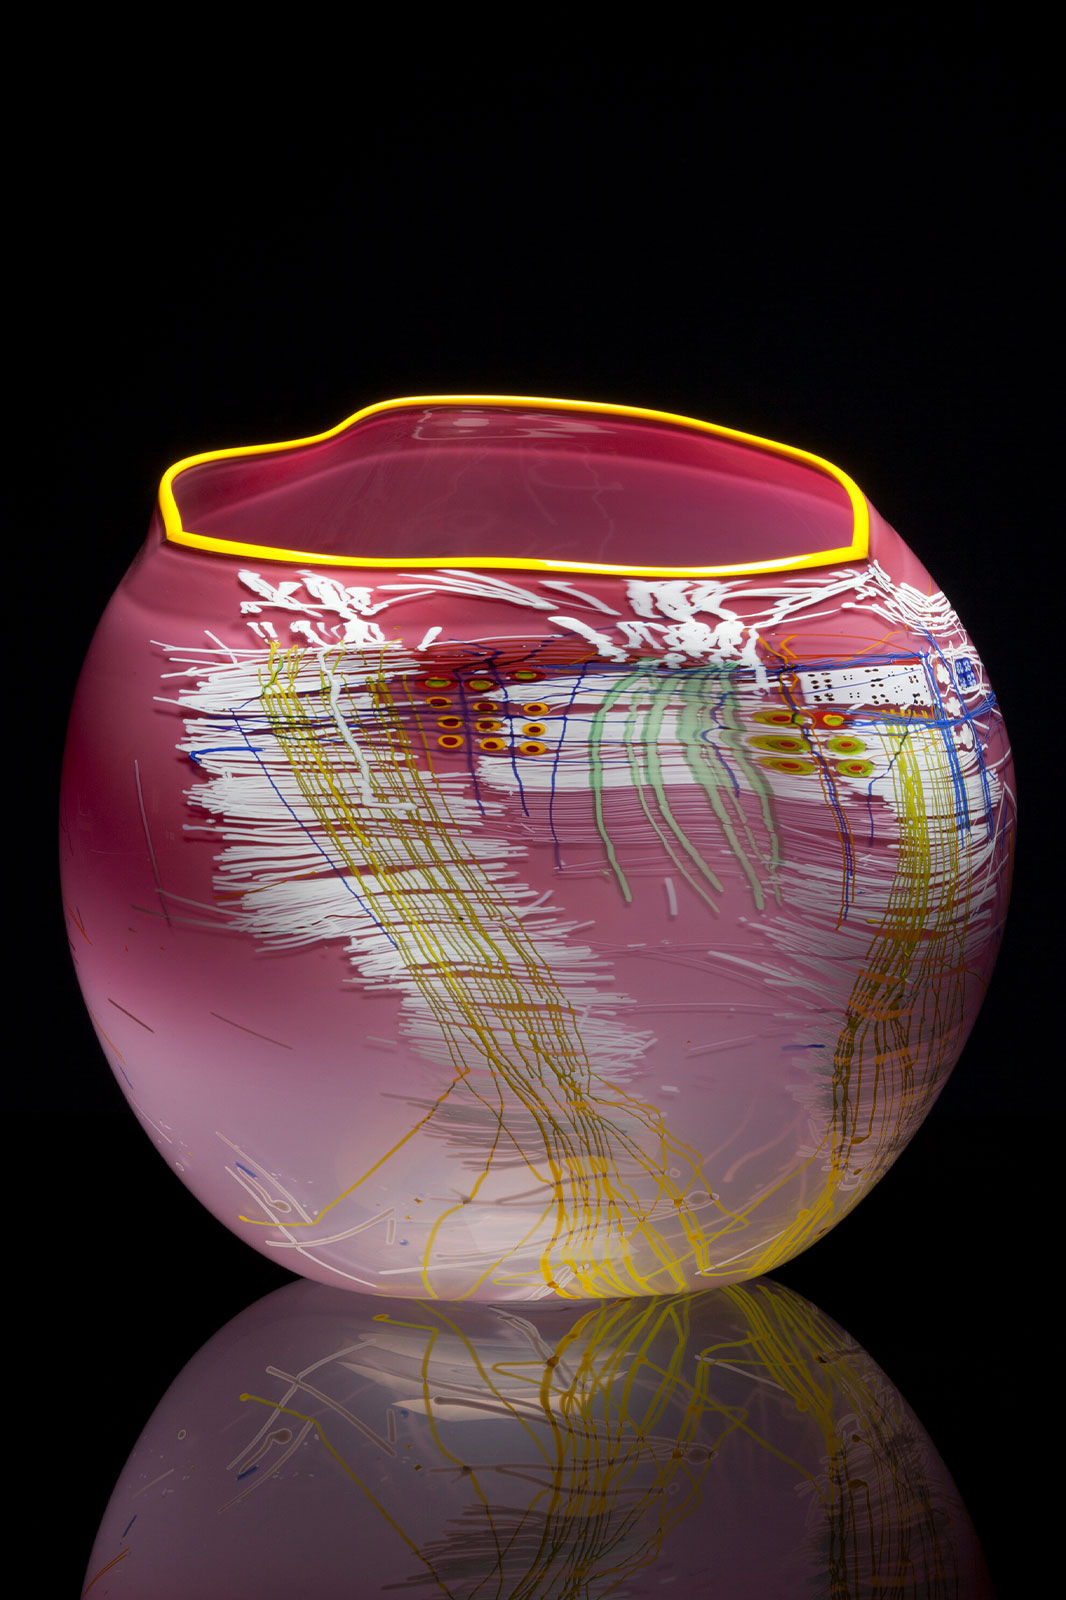 Rose Mist Soft Cylinder with Yellow Lip Wrap, 2014 by Dale Chihuly